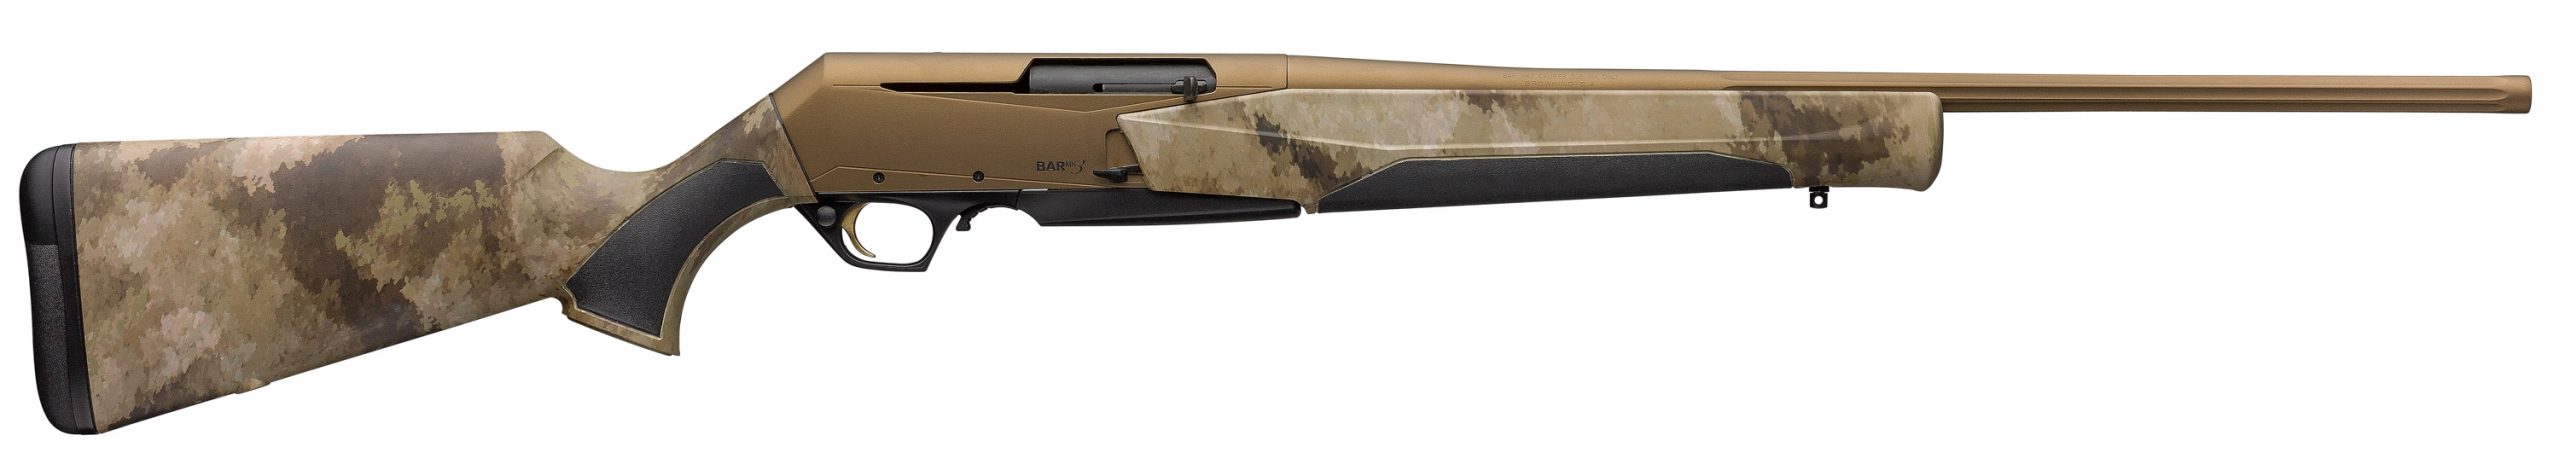 Browning Bar Mkiii Spd Ataca 243Win 22″ Hells Canyon Speed | A-Tacs Br031 064211 Scaled